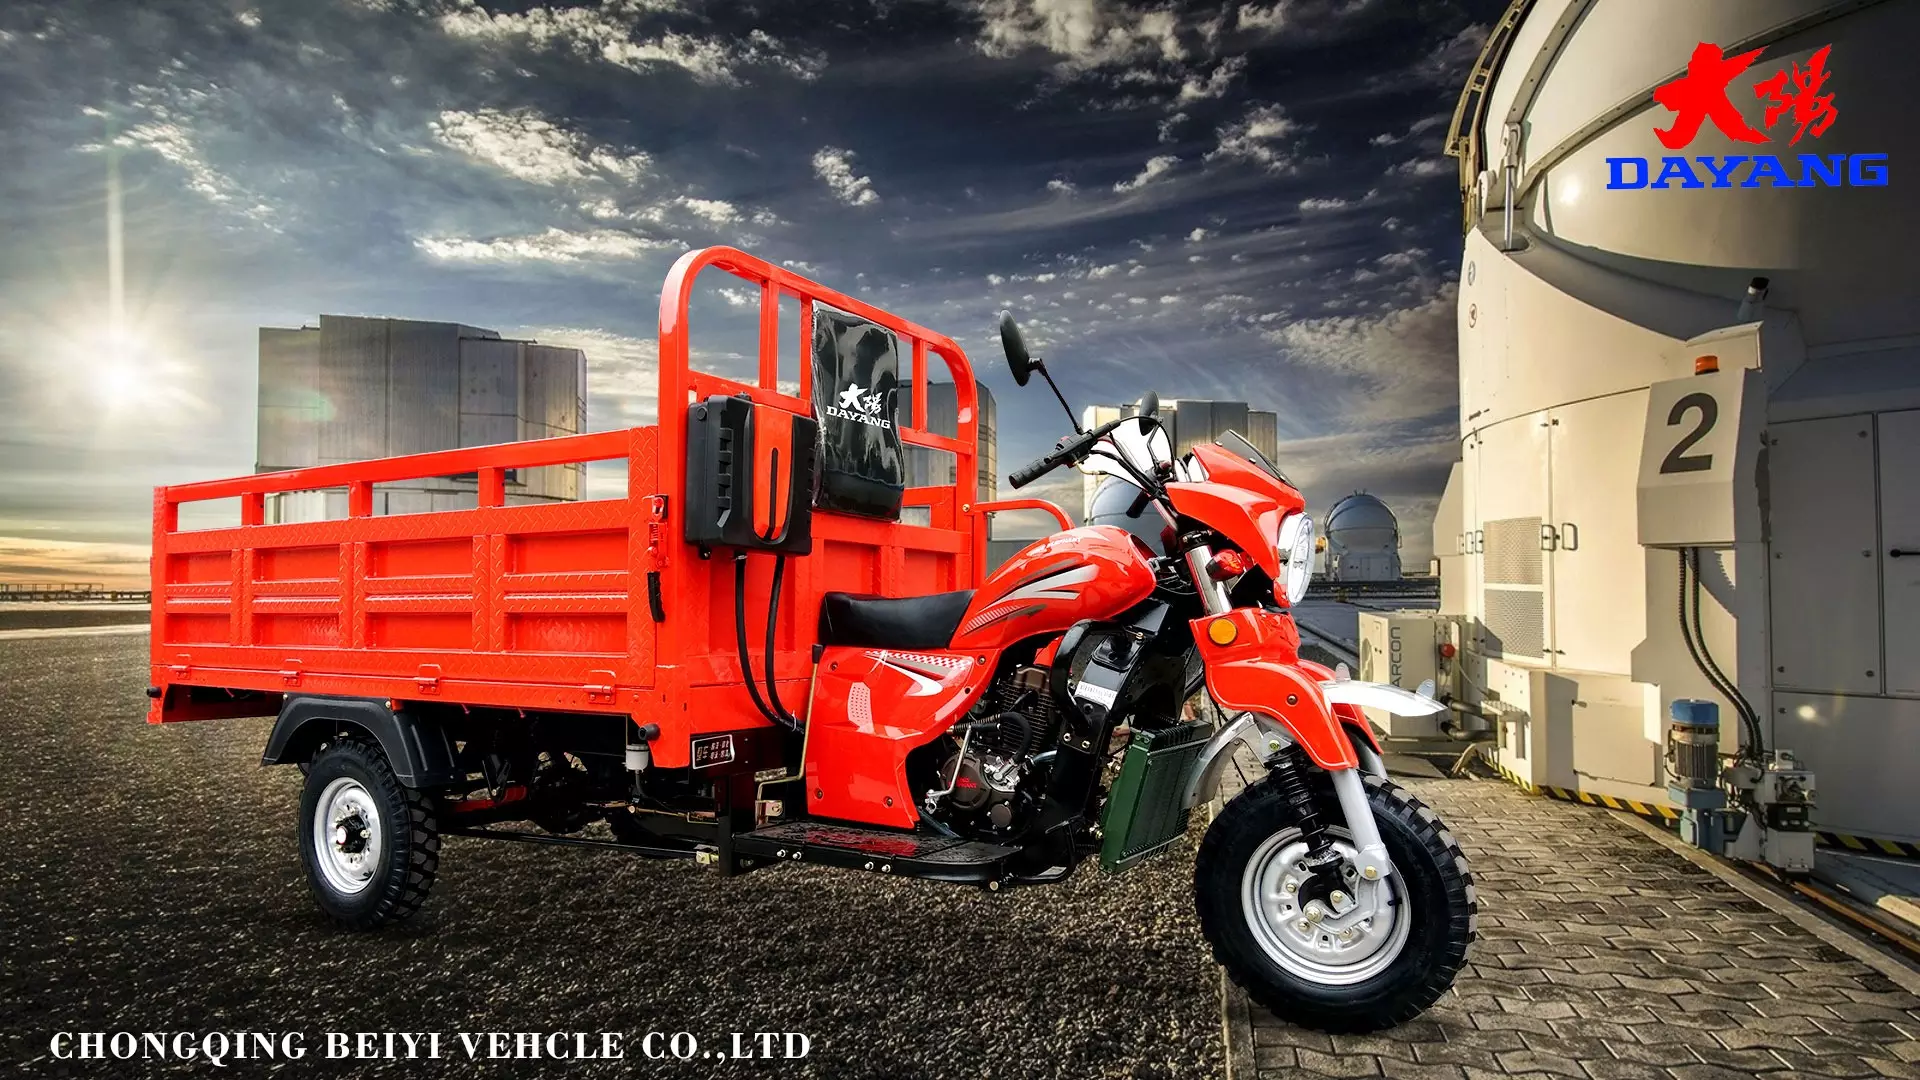 Heavy Loading Truck Tricycle 200CC/250CC/300CC Cargo 3wheels Motorcycle Tricycle Power Hydraulic Origin09 Type Spring Motorized